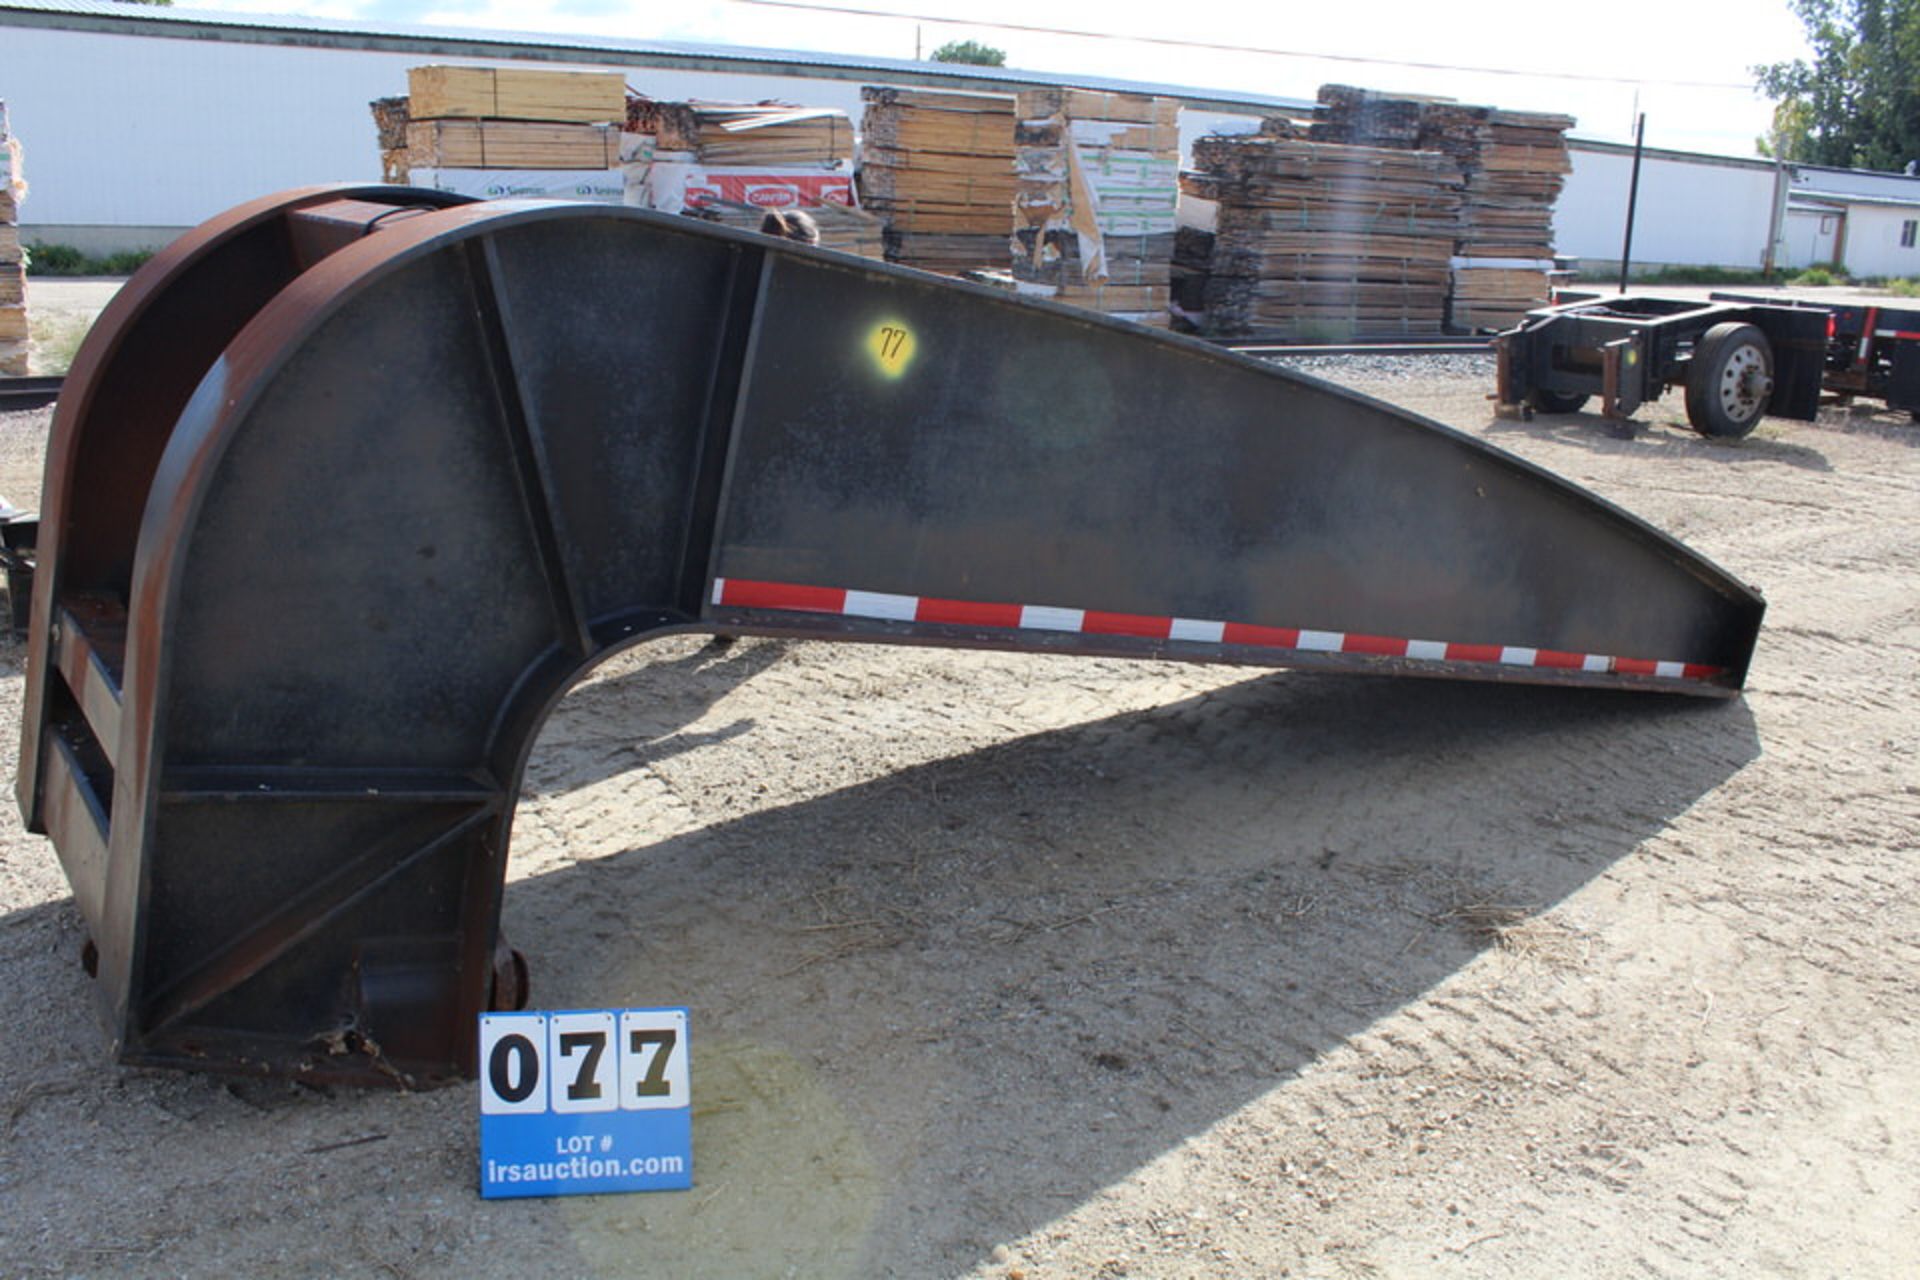 NOSE ATTCHMNT FOR DOUBLE DROP TRAILER (LOCATION: 4081 EASTSIDE HWY, STEVENSVILLE, MT, 59870)